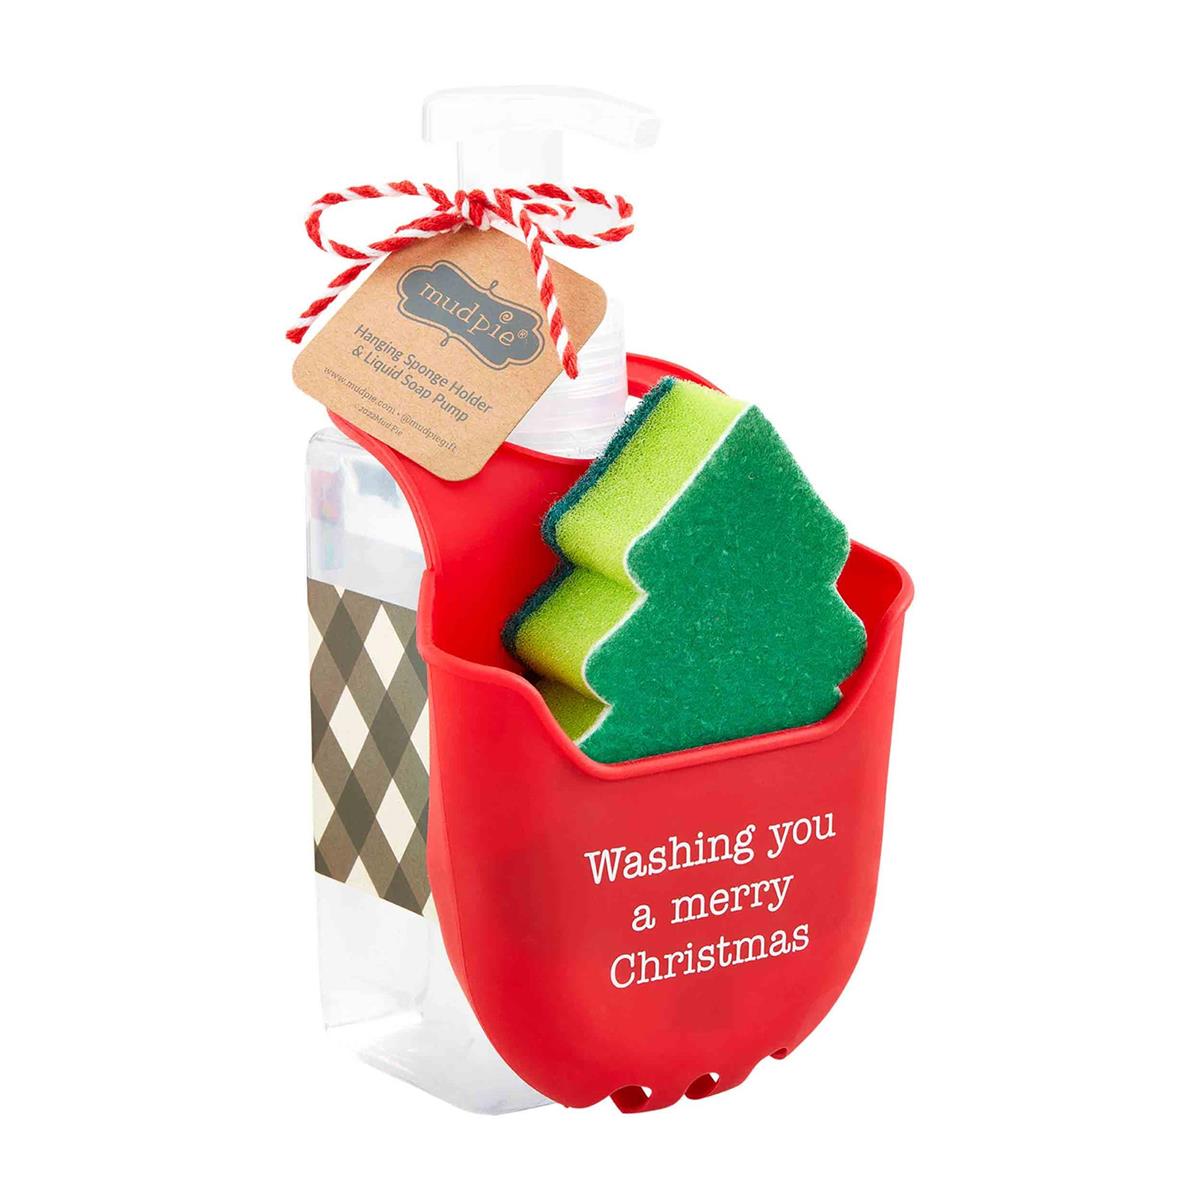 Christmas Soap & Sponge Caddy Sets by Mud Pie